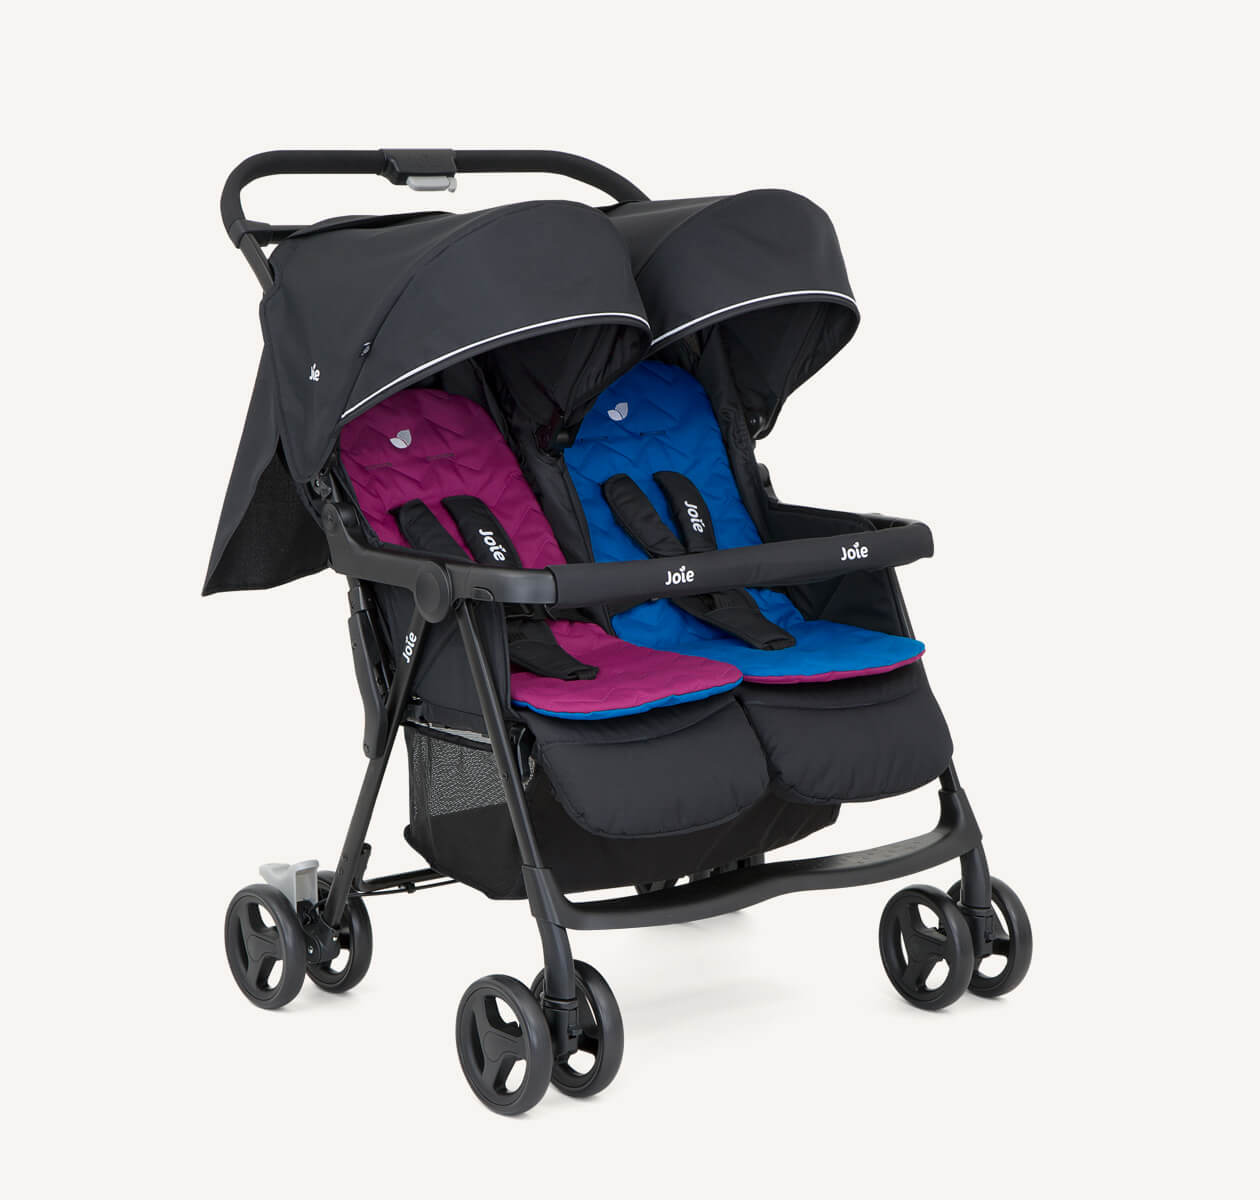  The Joie Aire Twin side-by-side double stroller in black at an angle, with a pink insert on the left seat and a blue insert on the right seat.